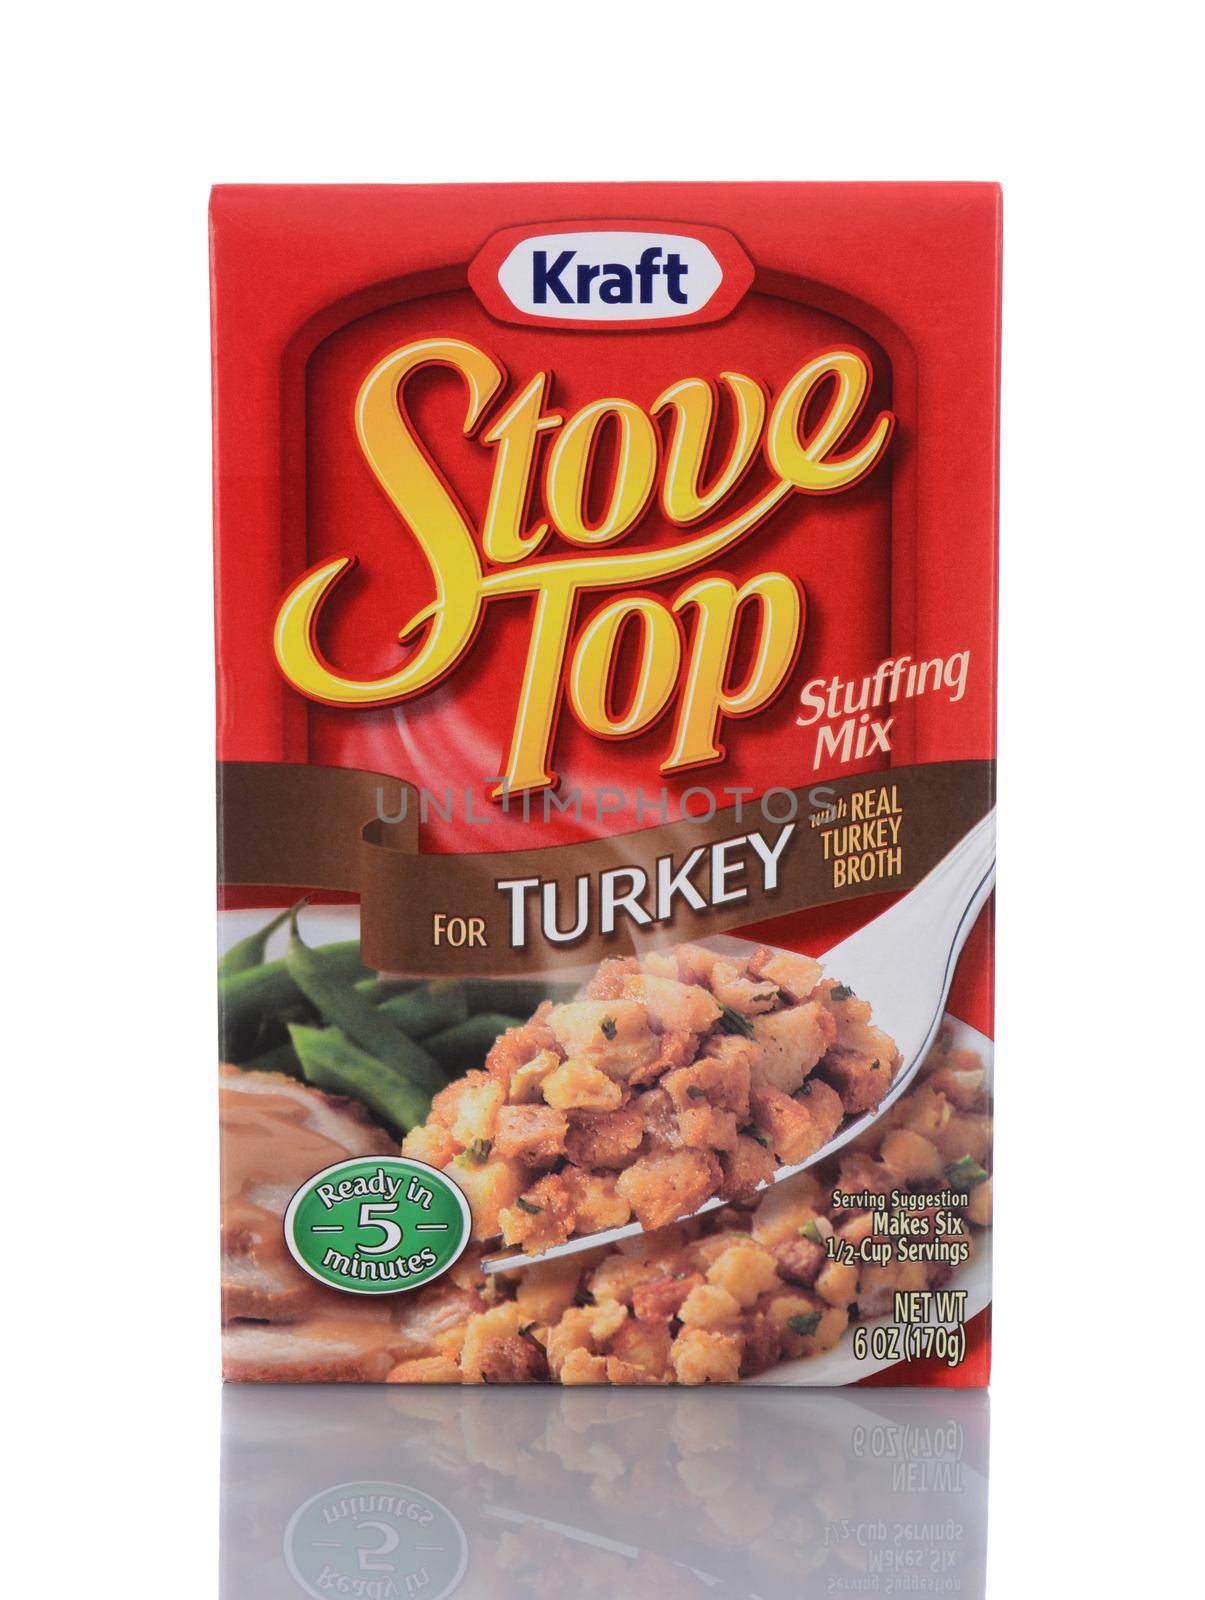 Stove Top Stuffing Mix by sCukrov